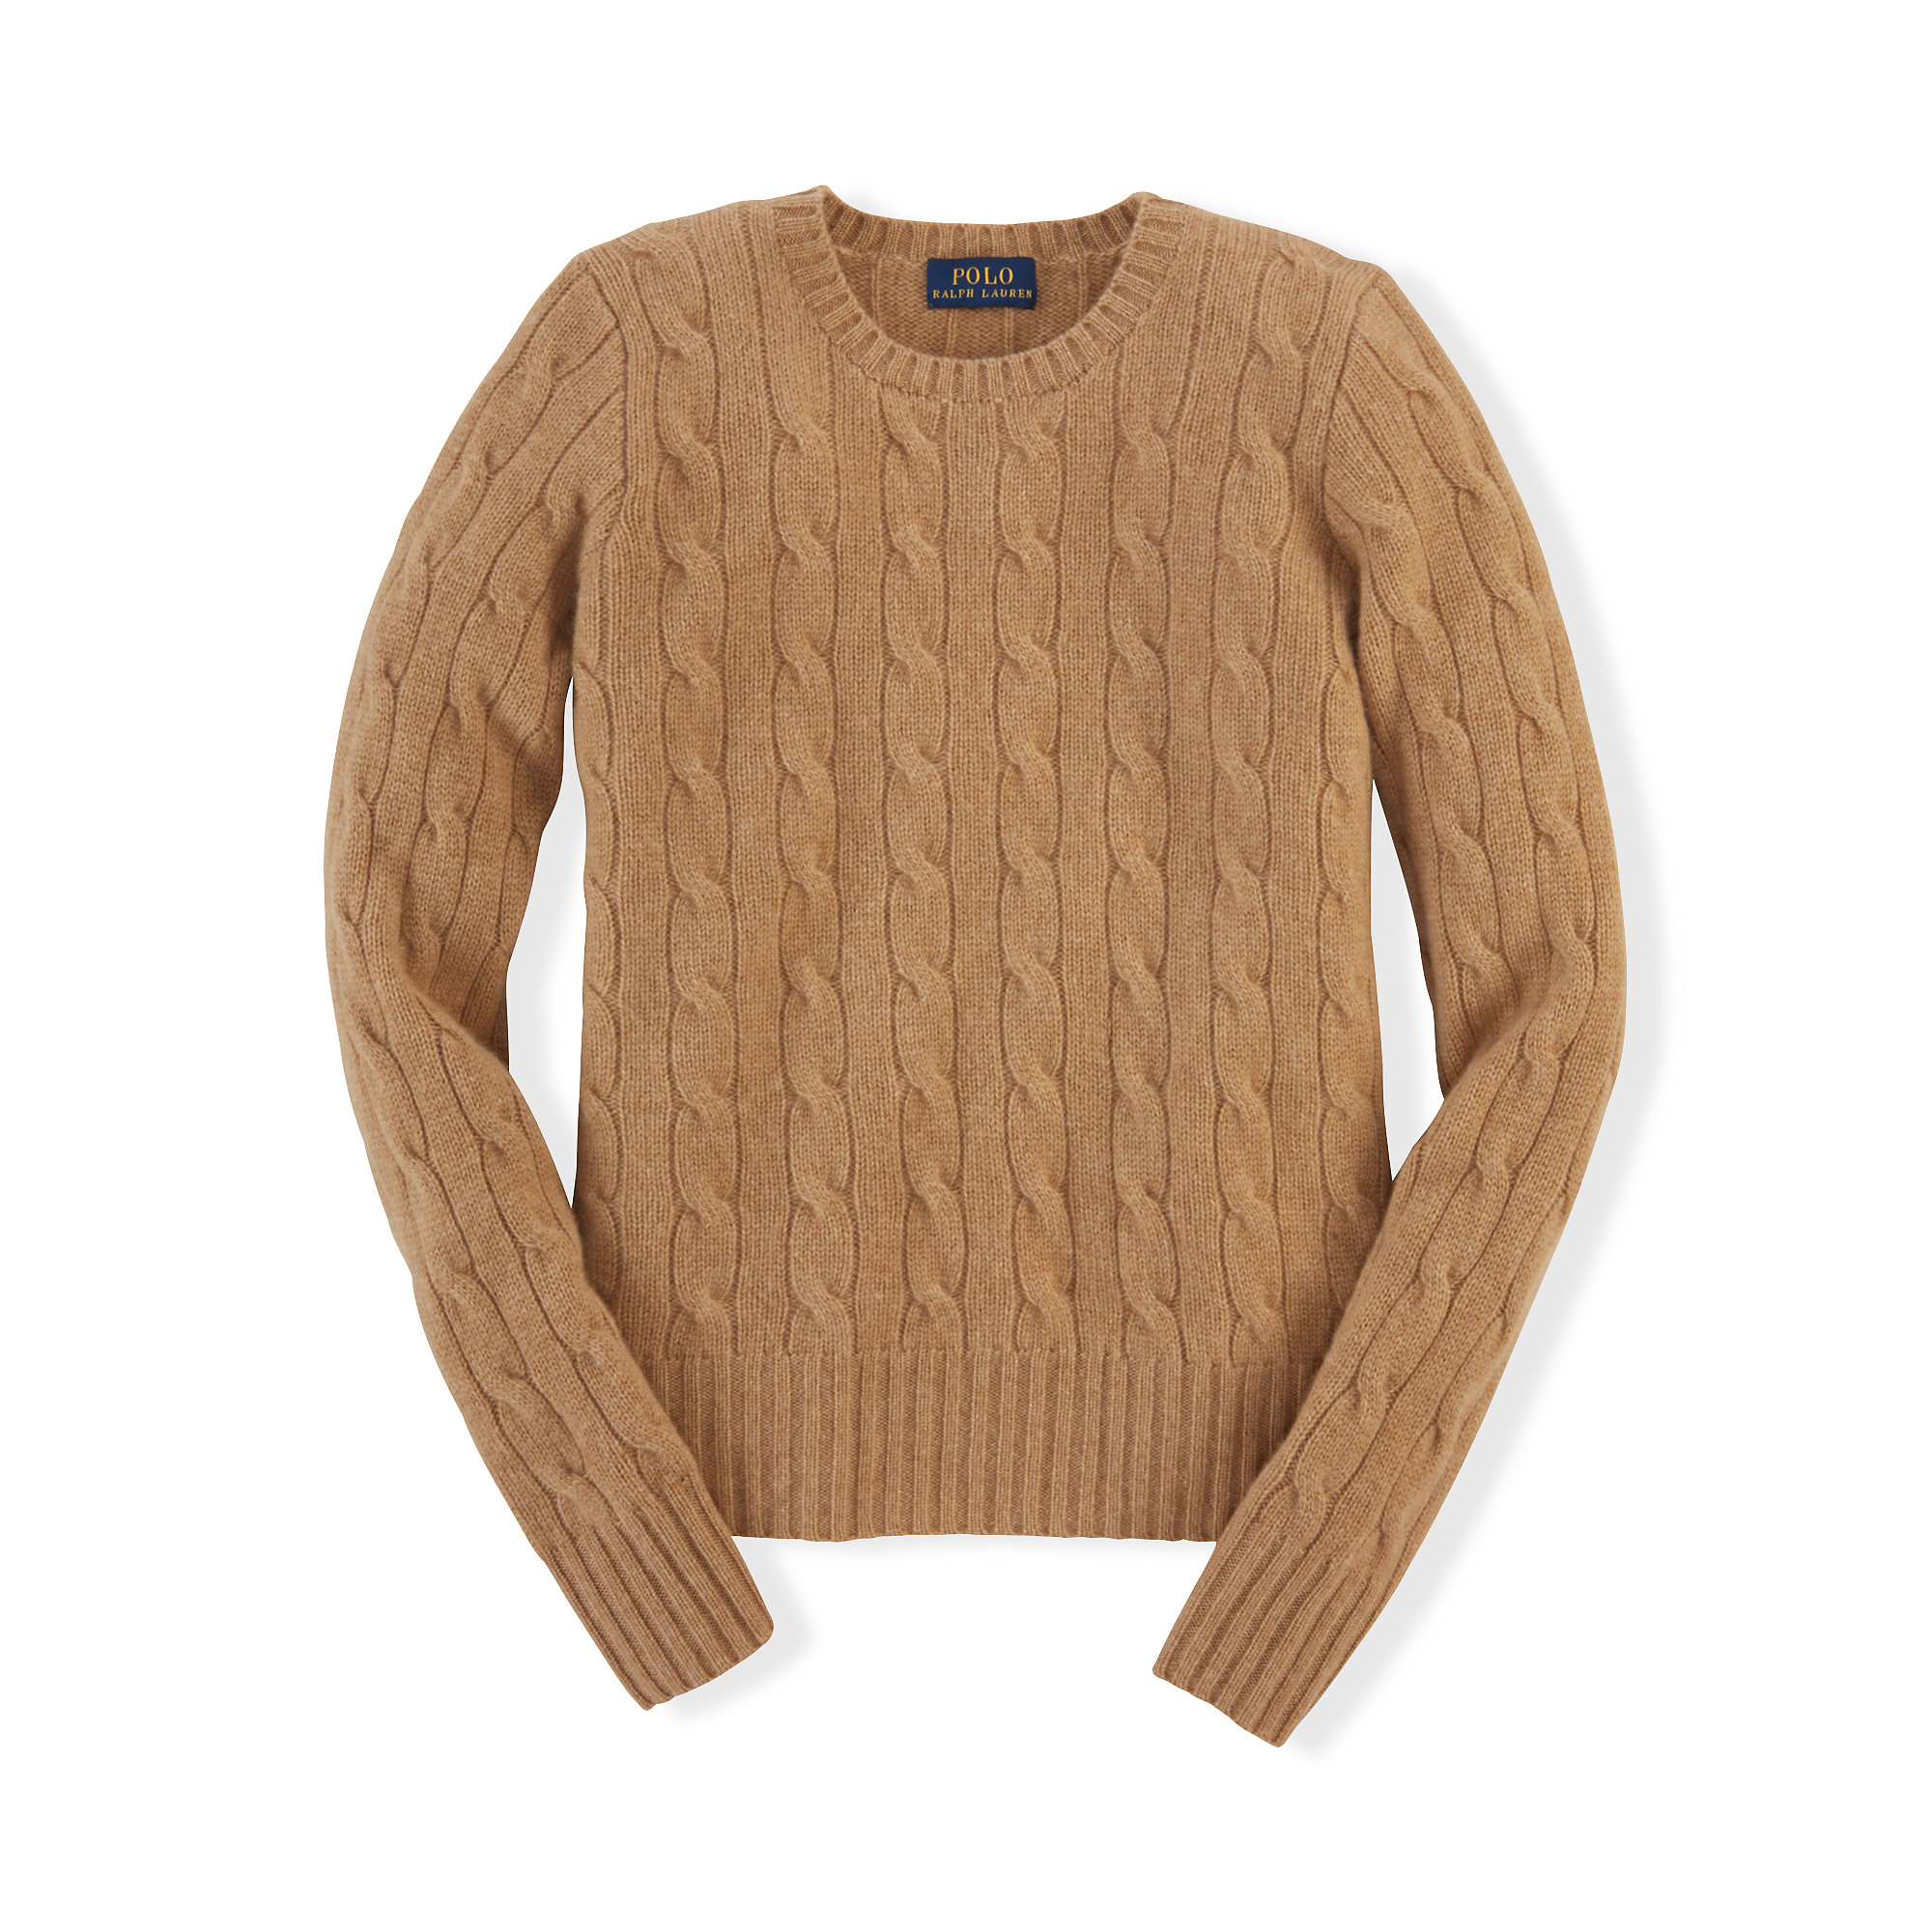 Ralph Lauren Cable-knit Cashmere Sweater in Brown - Lyst